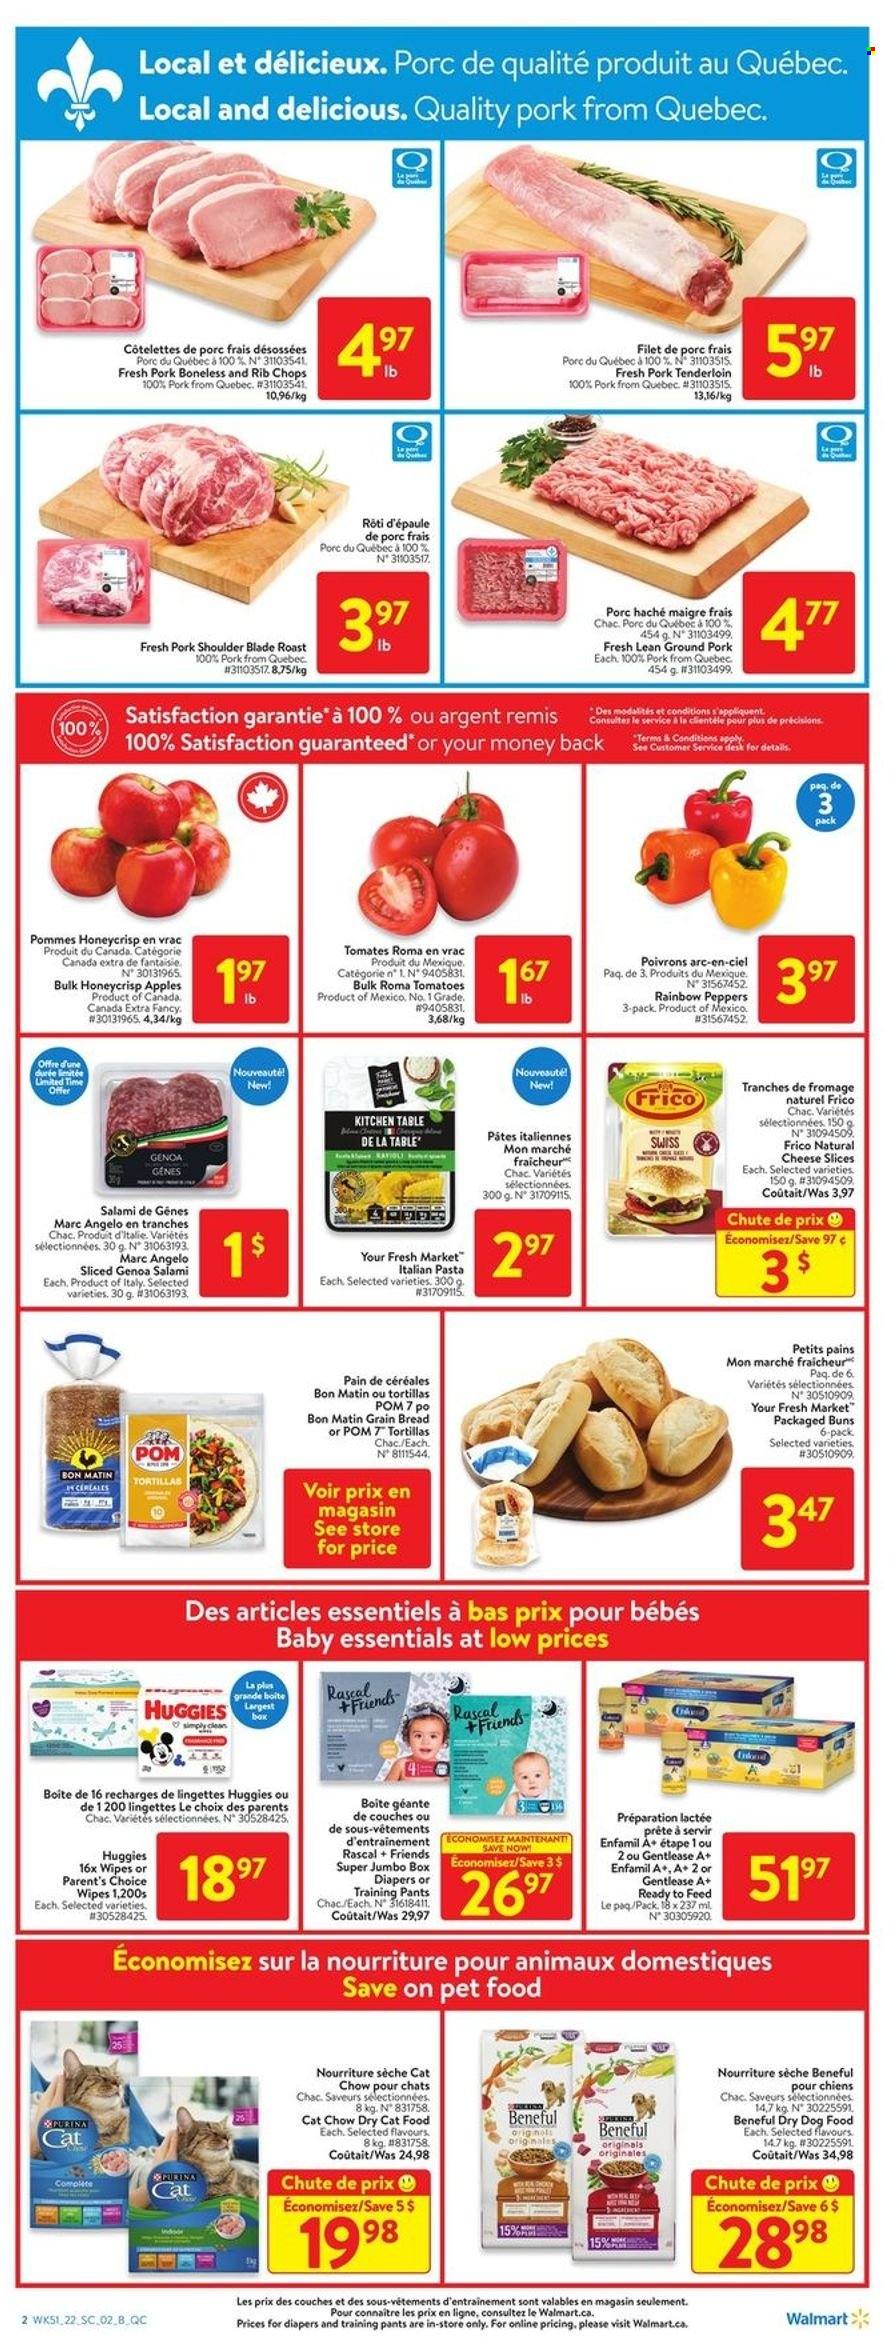 thumbnail - Walmart Flyer - January 13, 2022 - January 19, 2022 - Sales products - bread, tortillas, buns, tomatoes, peppers, apples, pasta, salami, sliced cheese, cheese, Enfamil, ground pork, pork meat, pork shoulder, pork tenderloin, rib chops, wipes, pants, nappies, baby pants, animal food, cat food, dog food, Purina, dry dog food, dry cat food, table, kitchen table, desk, Huggies. Page 2.